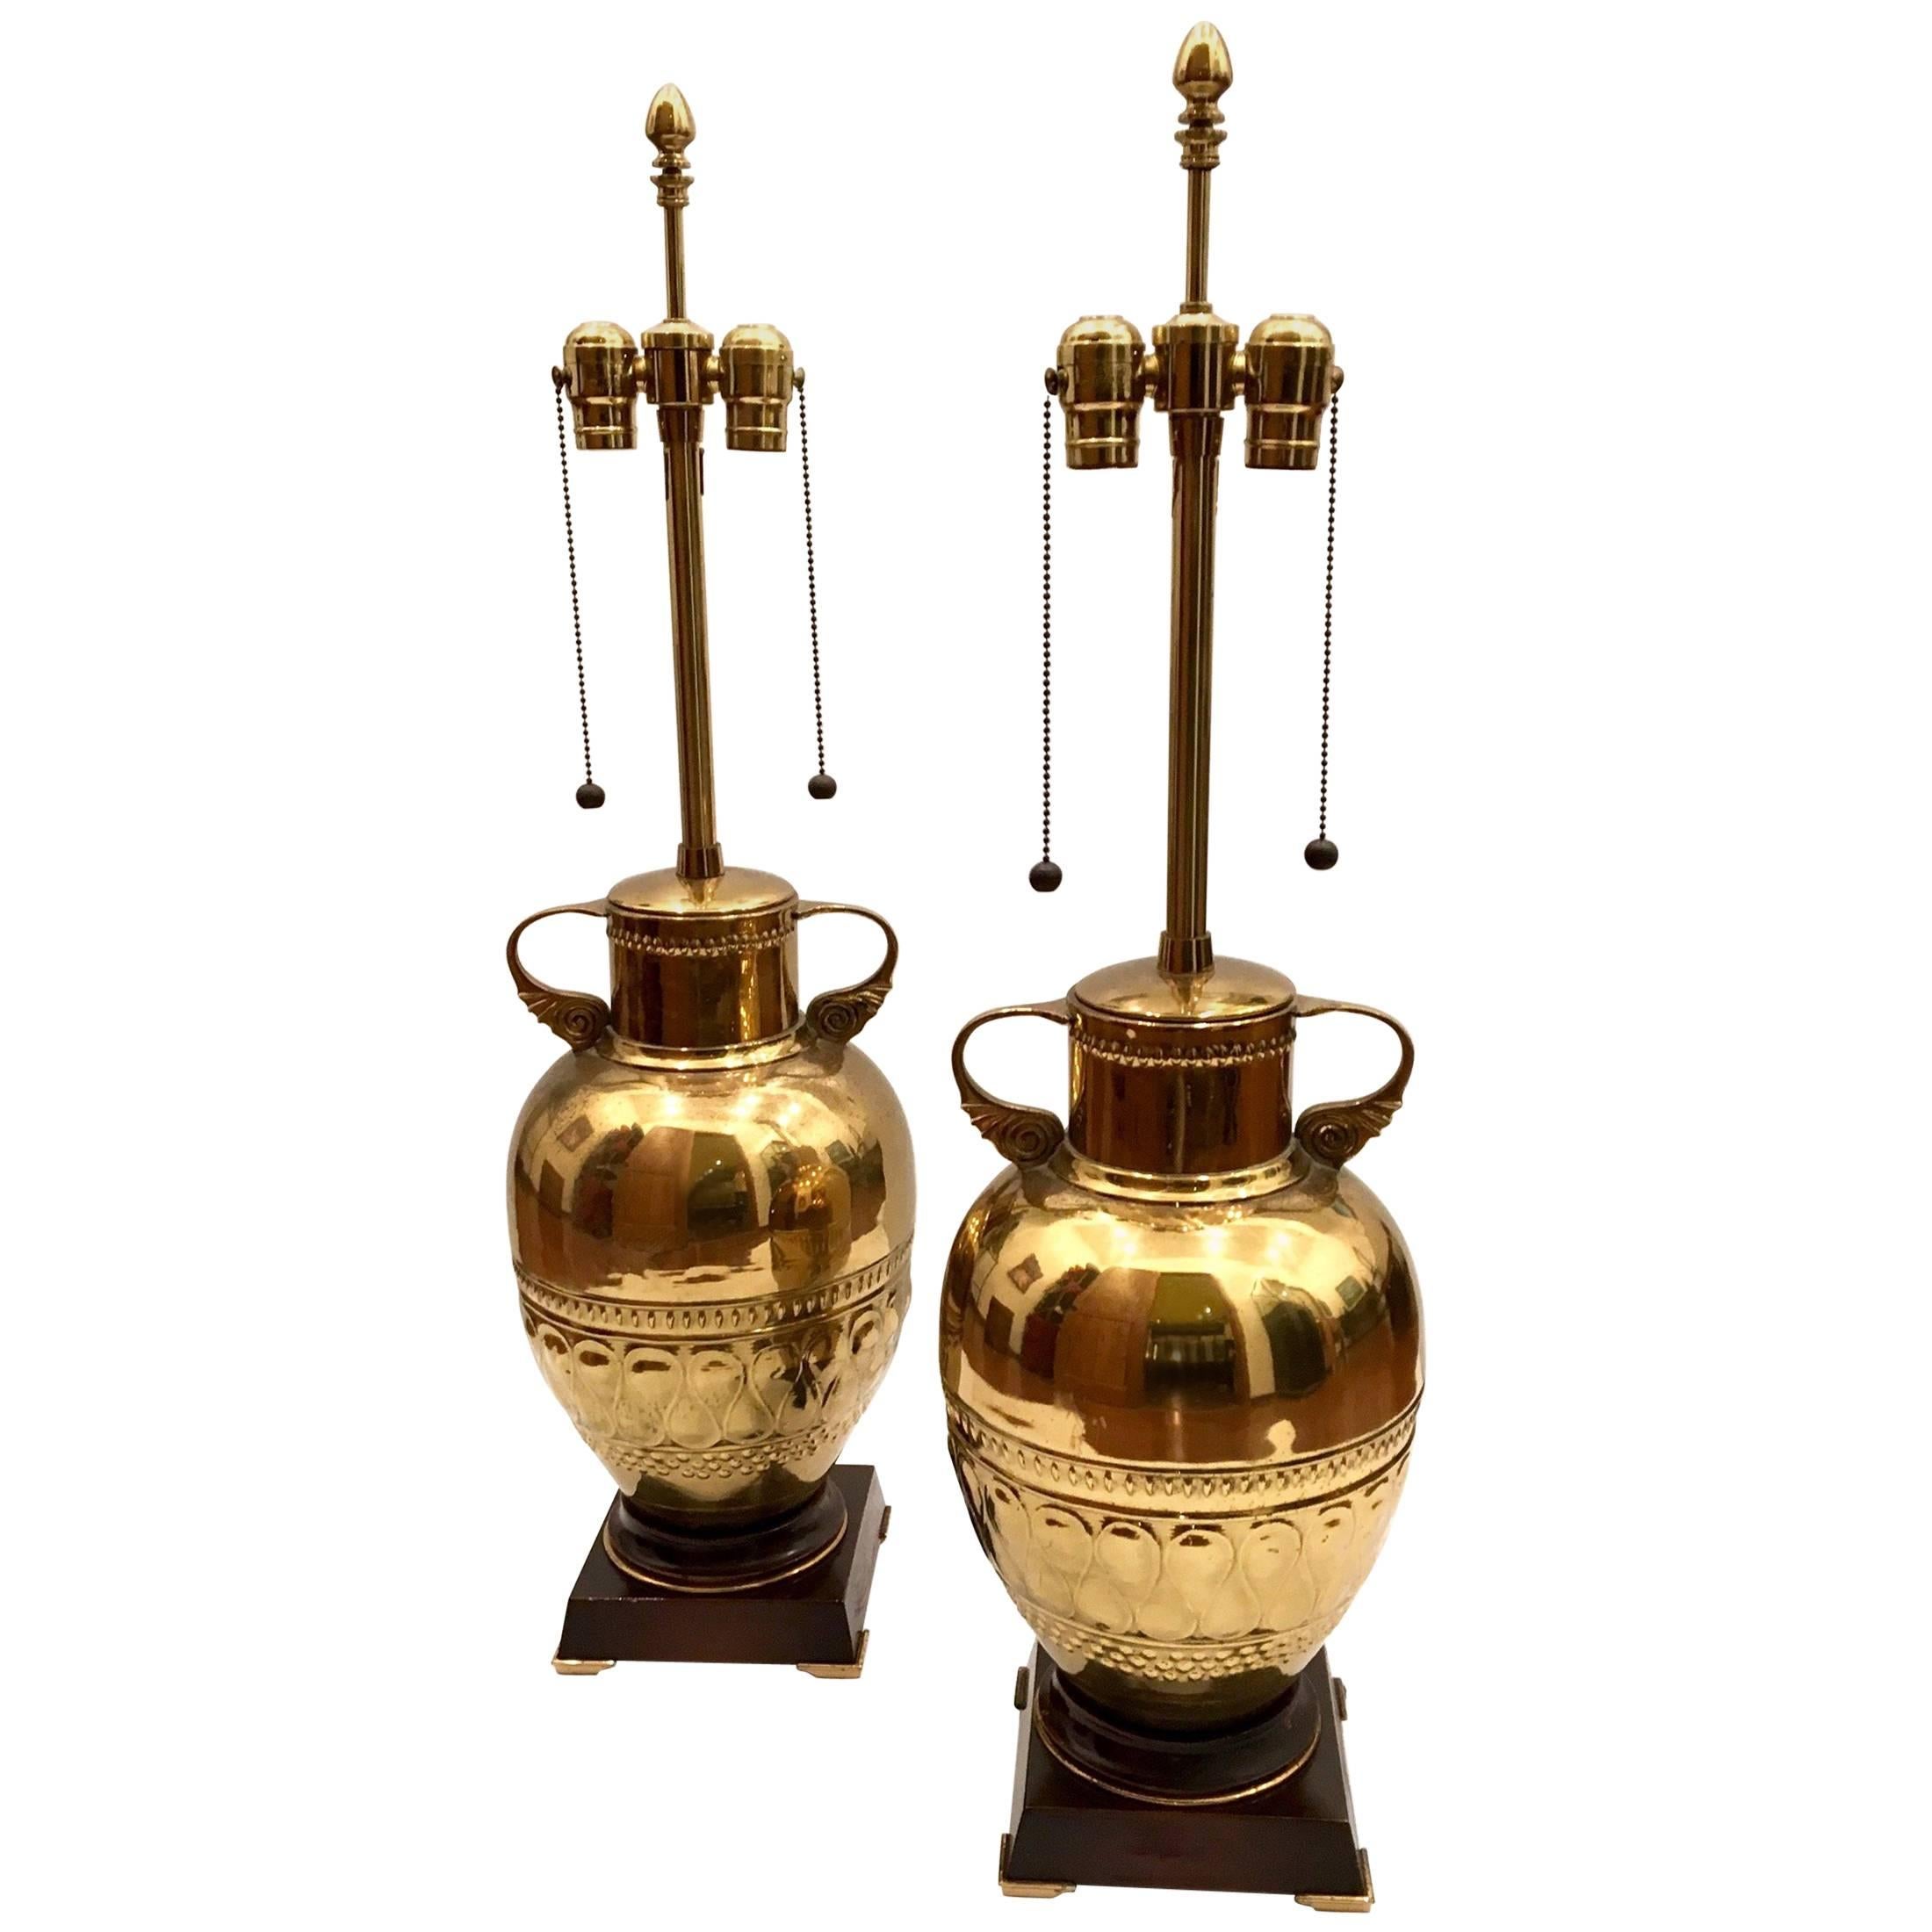 Pair of Tall Brass Urn Table Lamps by Marbro Lamp Company